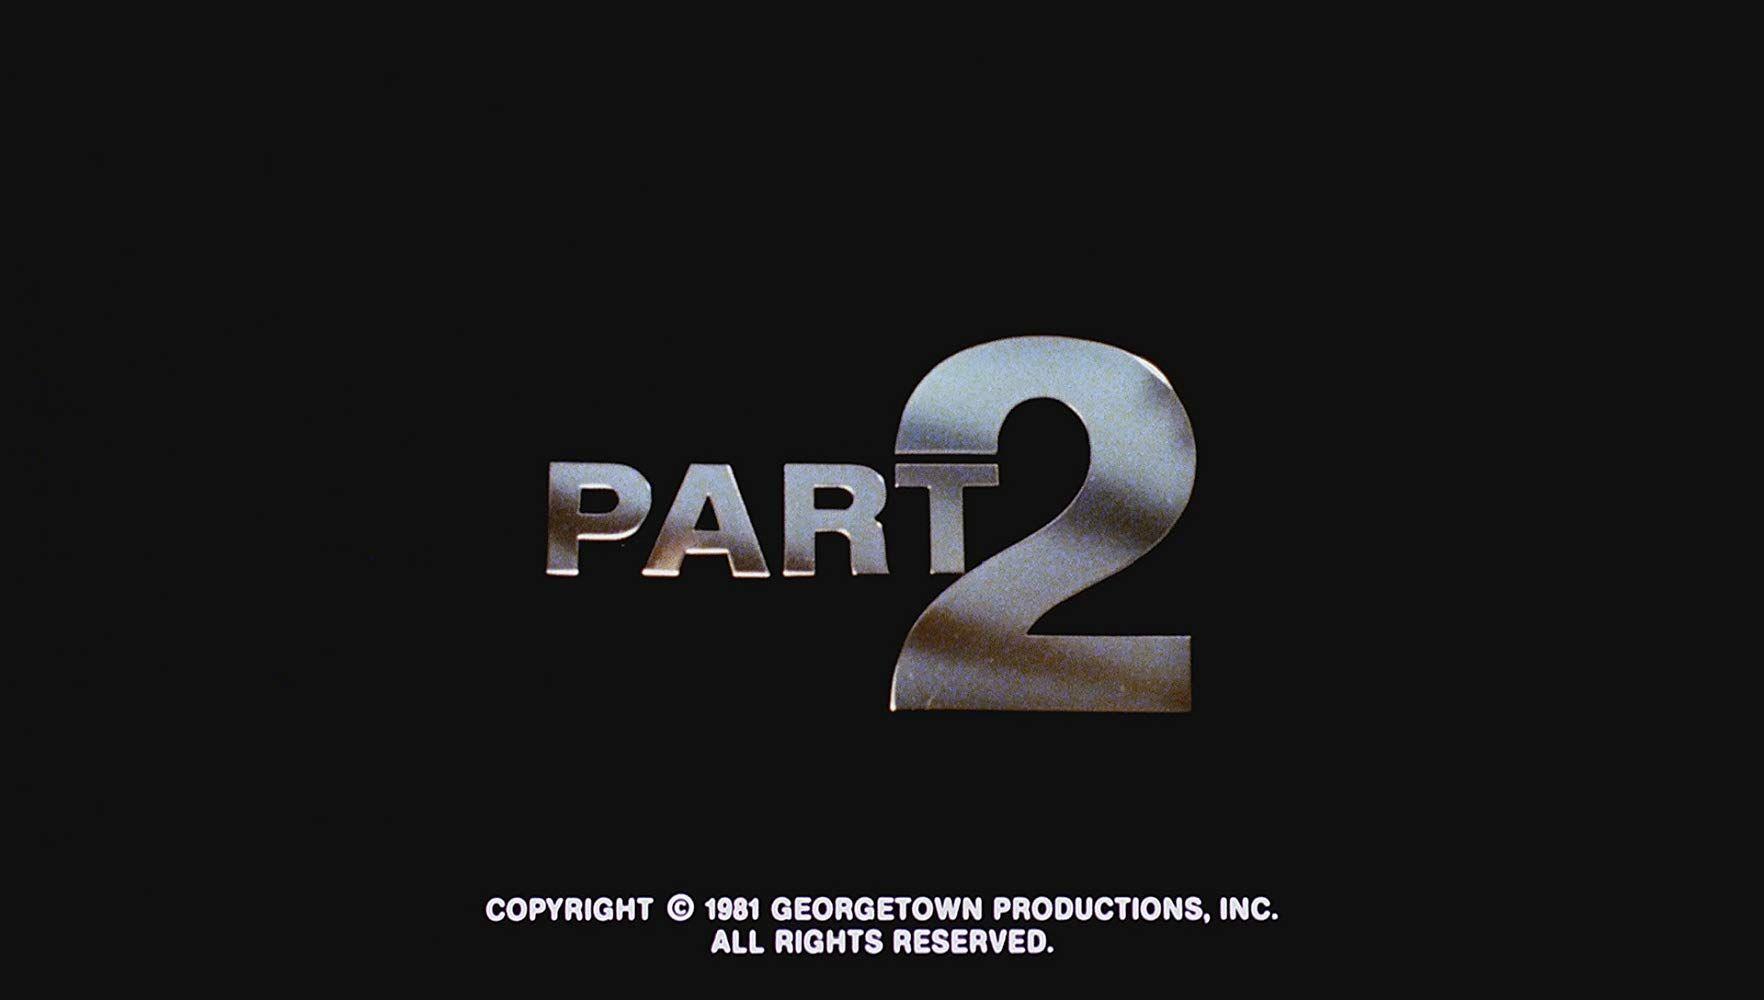 Friday the 13th Part 2 Logo - Friday the 13th Part 2 (1981)